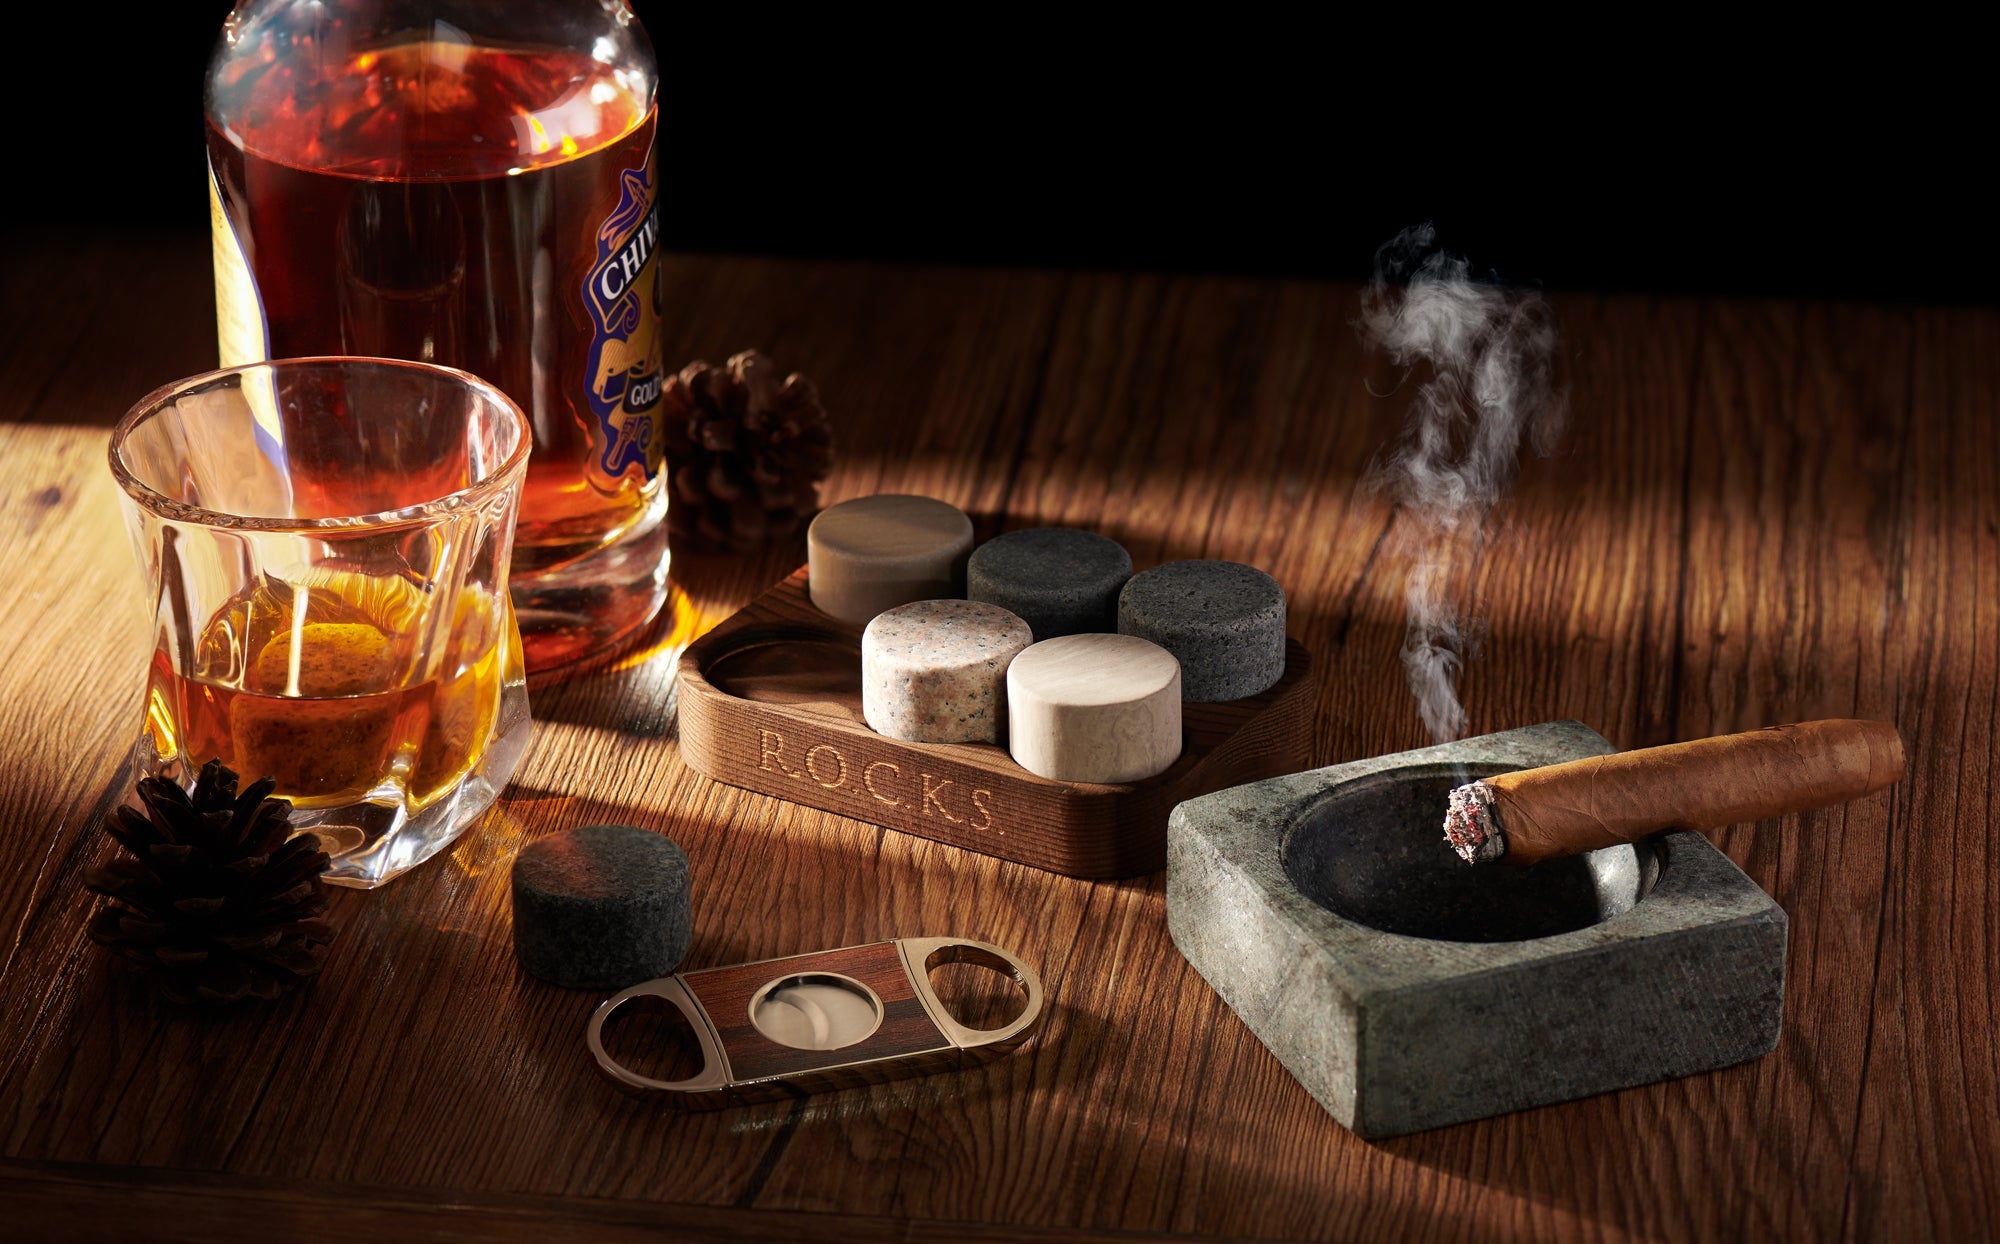 Walnut Cigar Ashtray And Whiskey Coaster • The Gentleman's Flavor